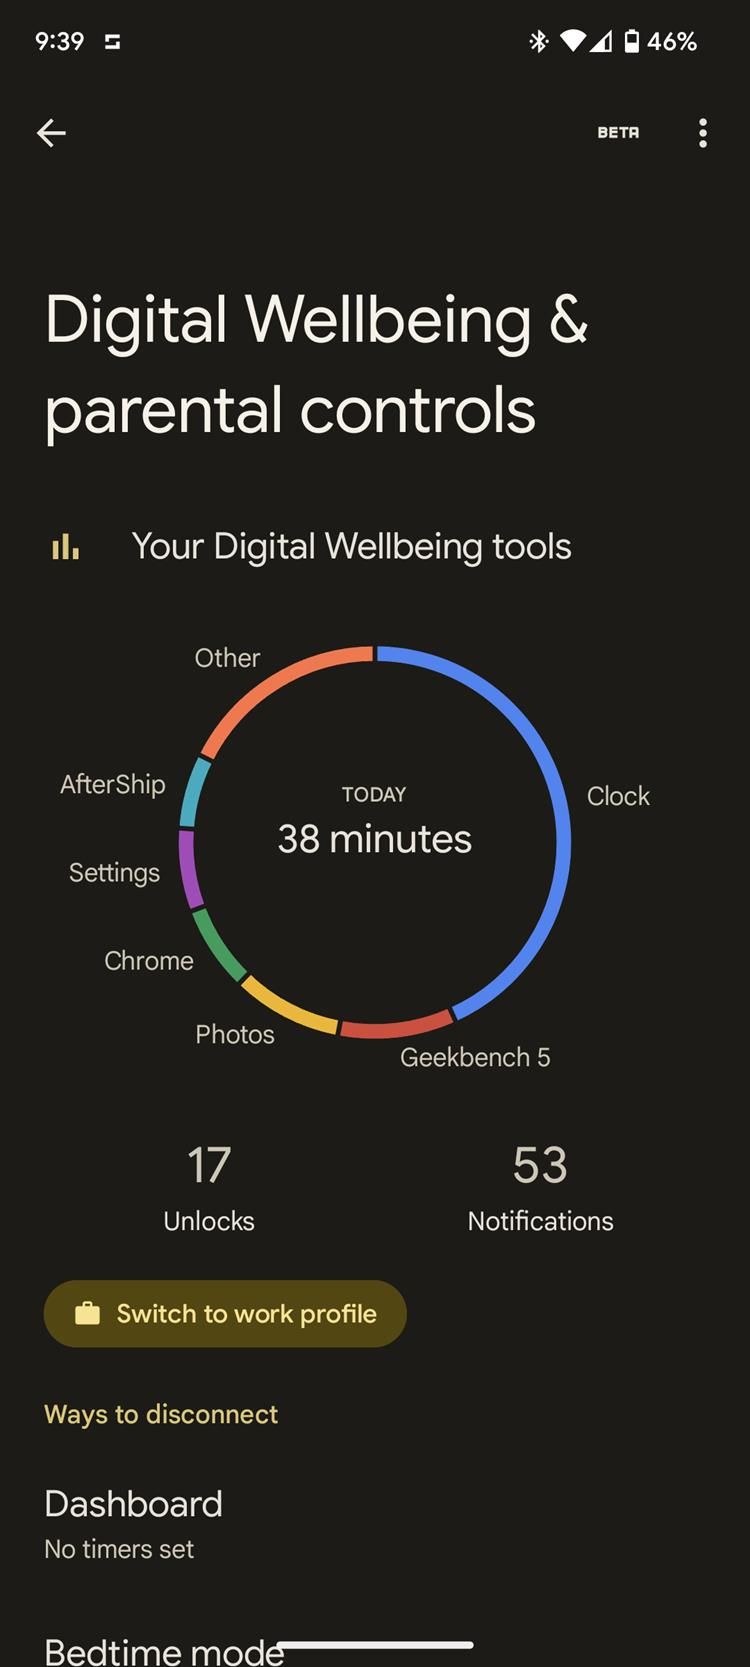 The main page of the Digital Wellbeing settings showing a breakdown of daily phone usage as well as the number of unlocks and notifications recieved